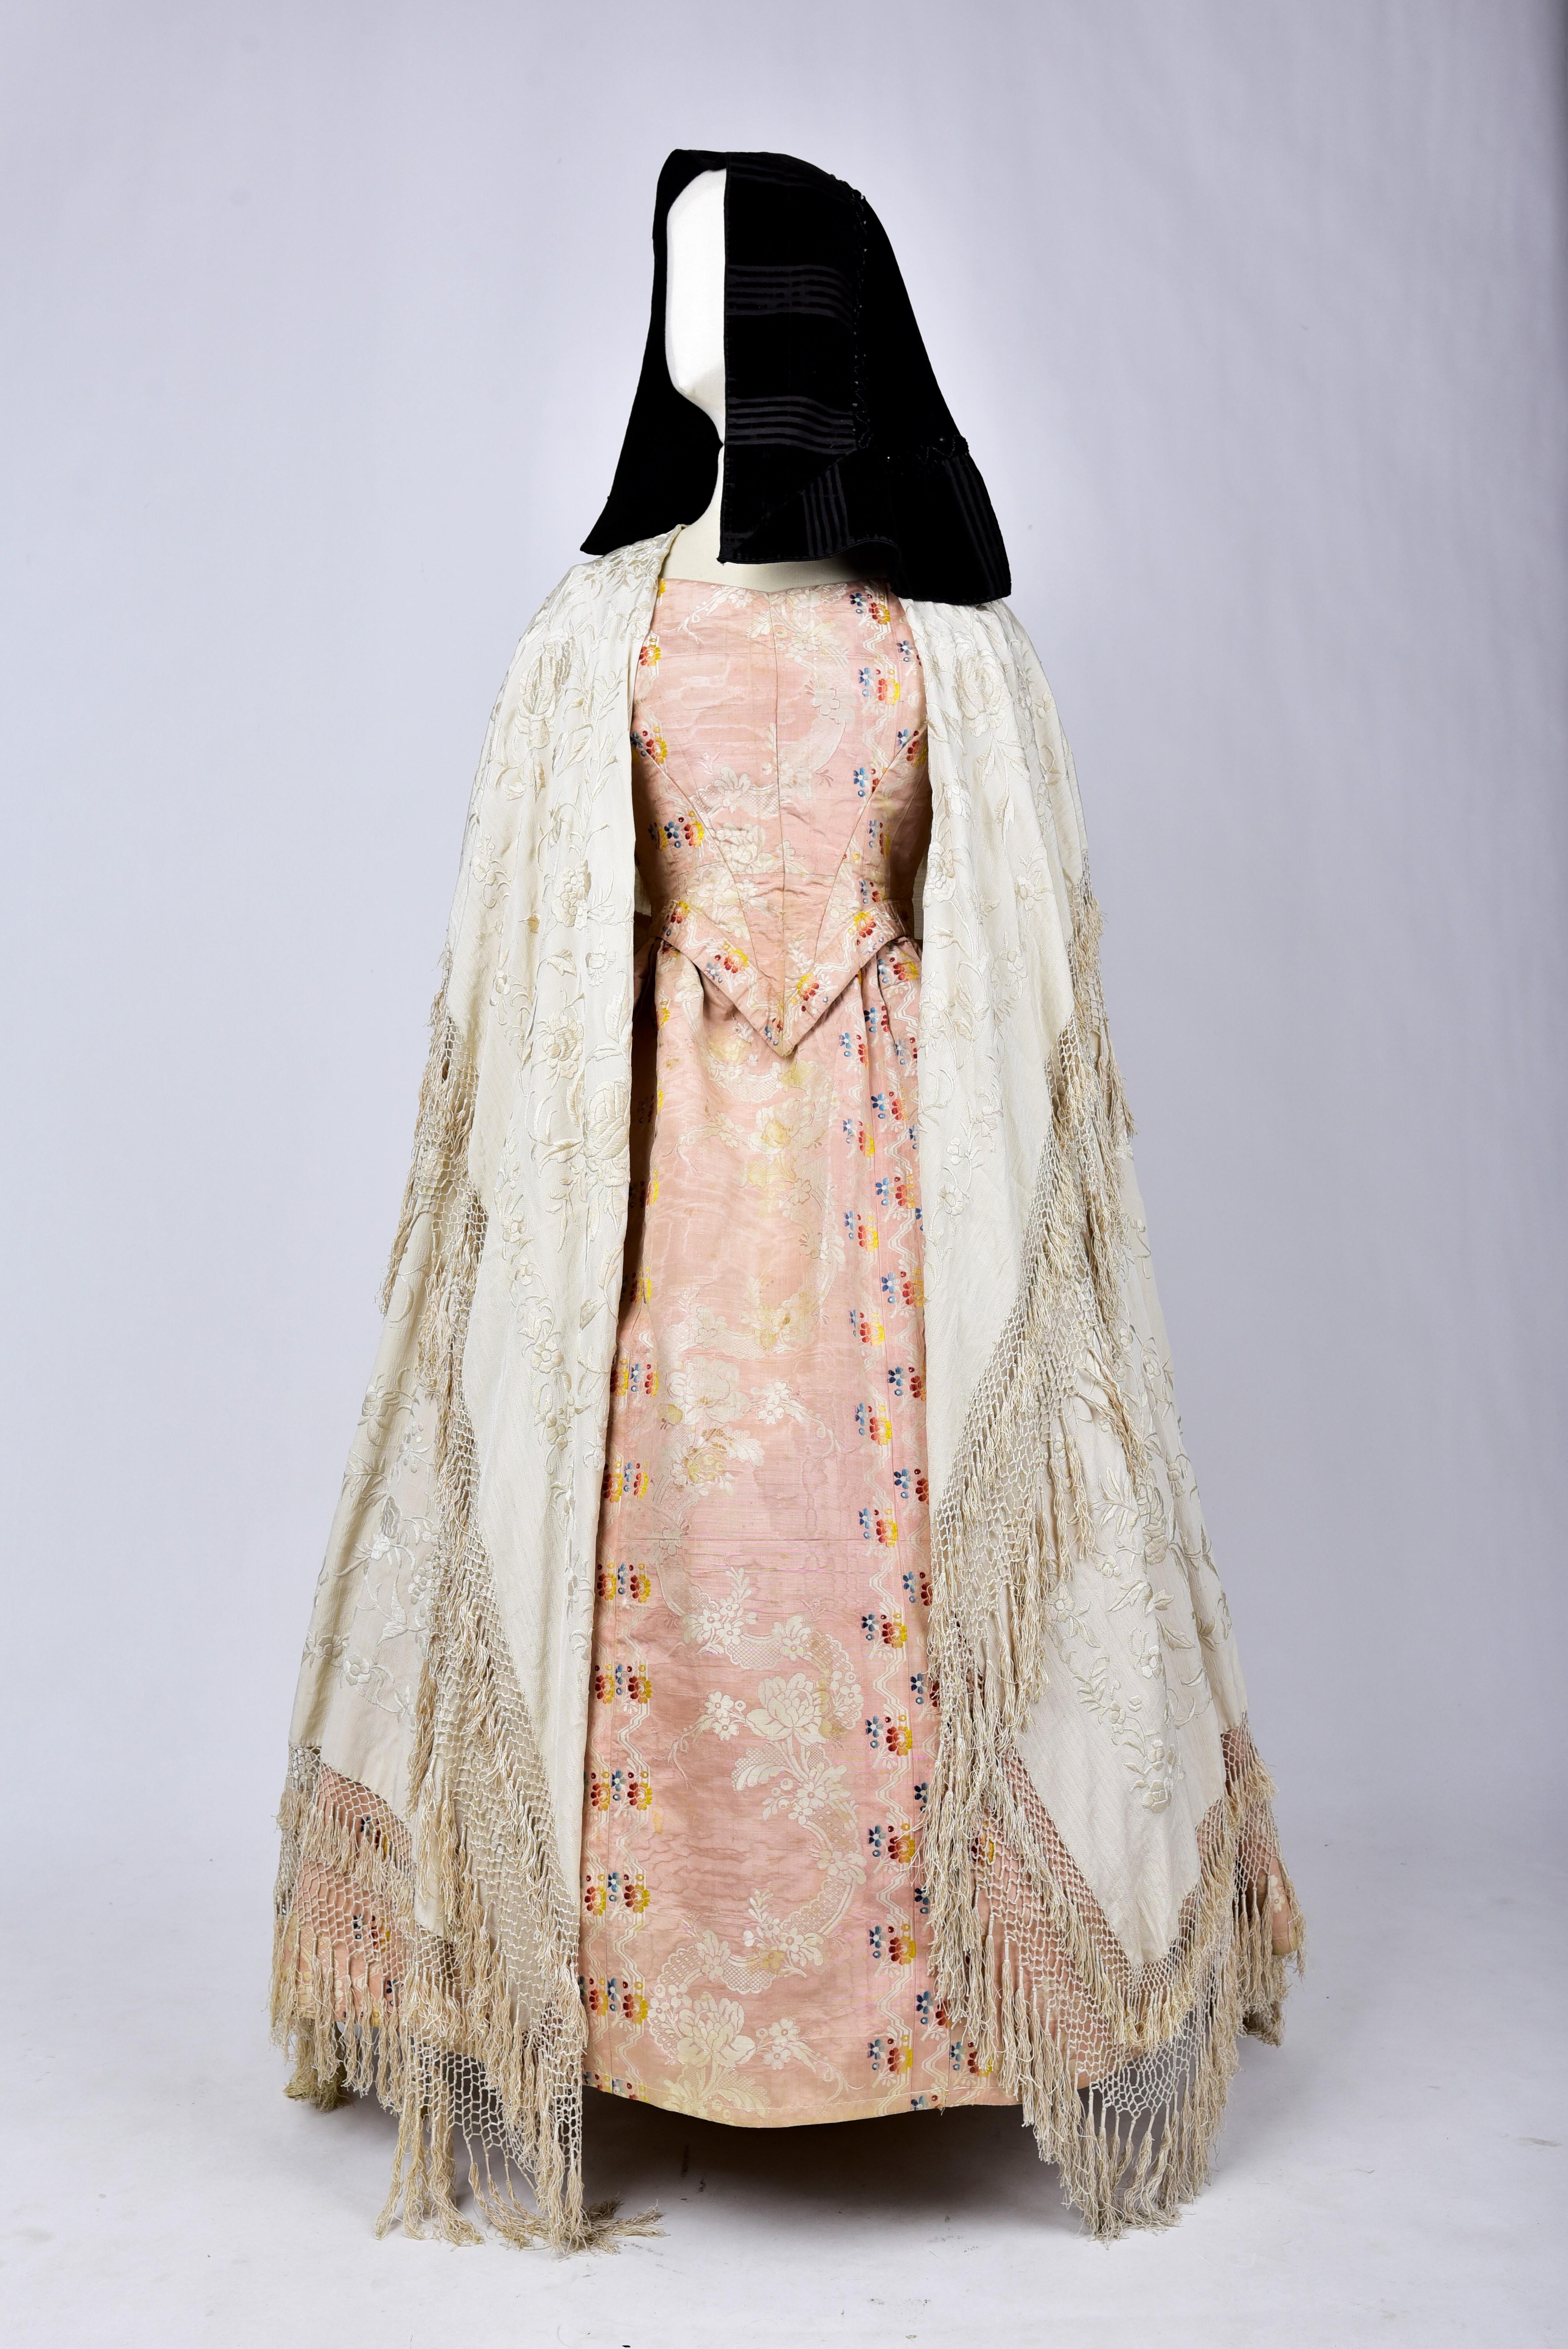 Circa 1860
Spain

Spanish festive costume composed of a brocaded silk moire crinoline dress, a black velvet mantilla embroidered with jet pearls and a cream silk crepe embroidered shawl called Manila. The set was collected in Madrid and is worthy of